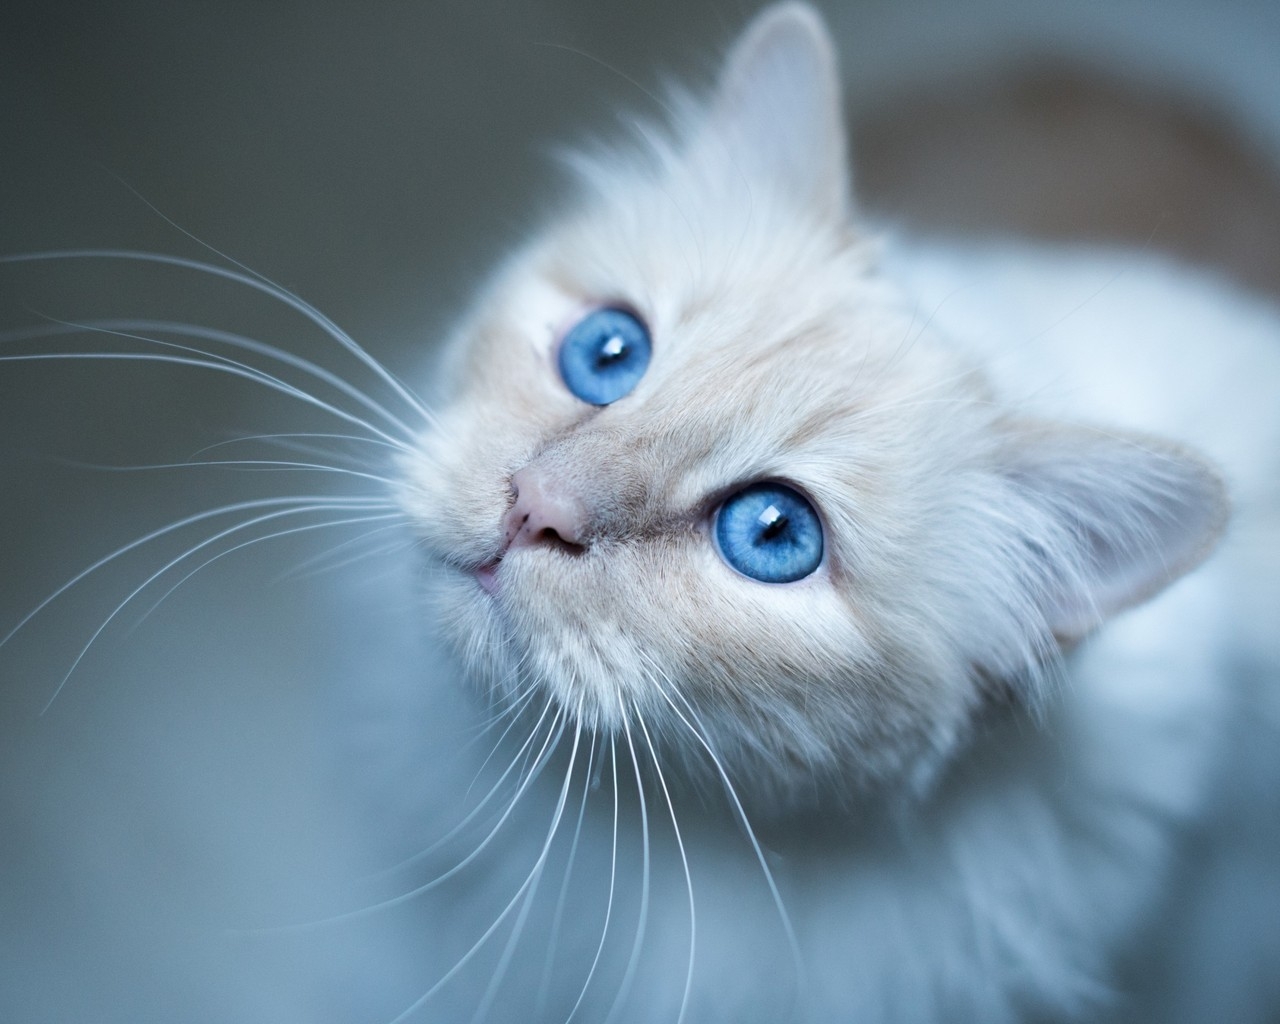 Kitty Blue Eyes for 1280 x 1024 resolution